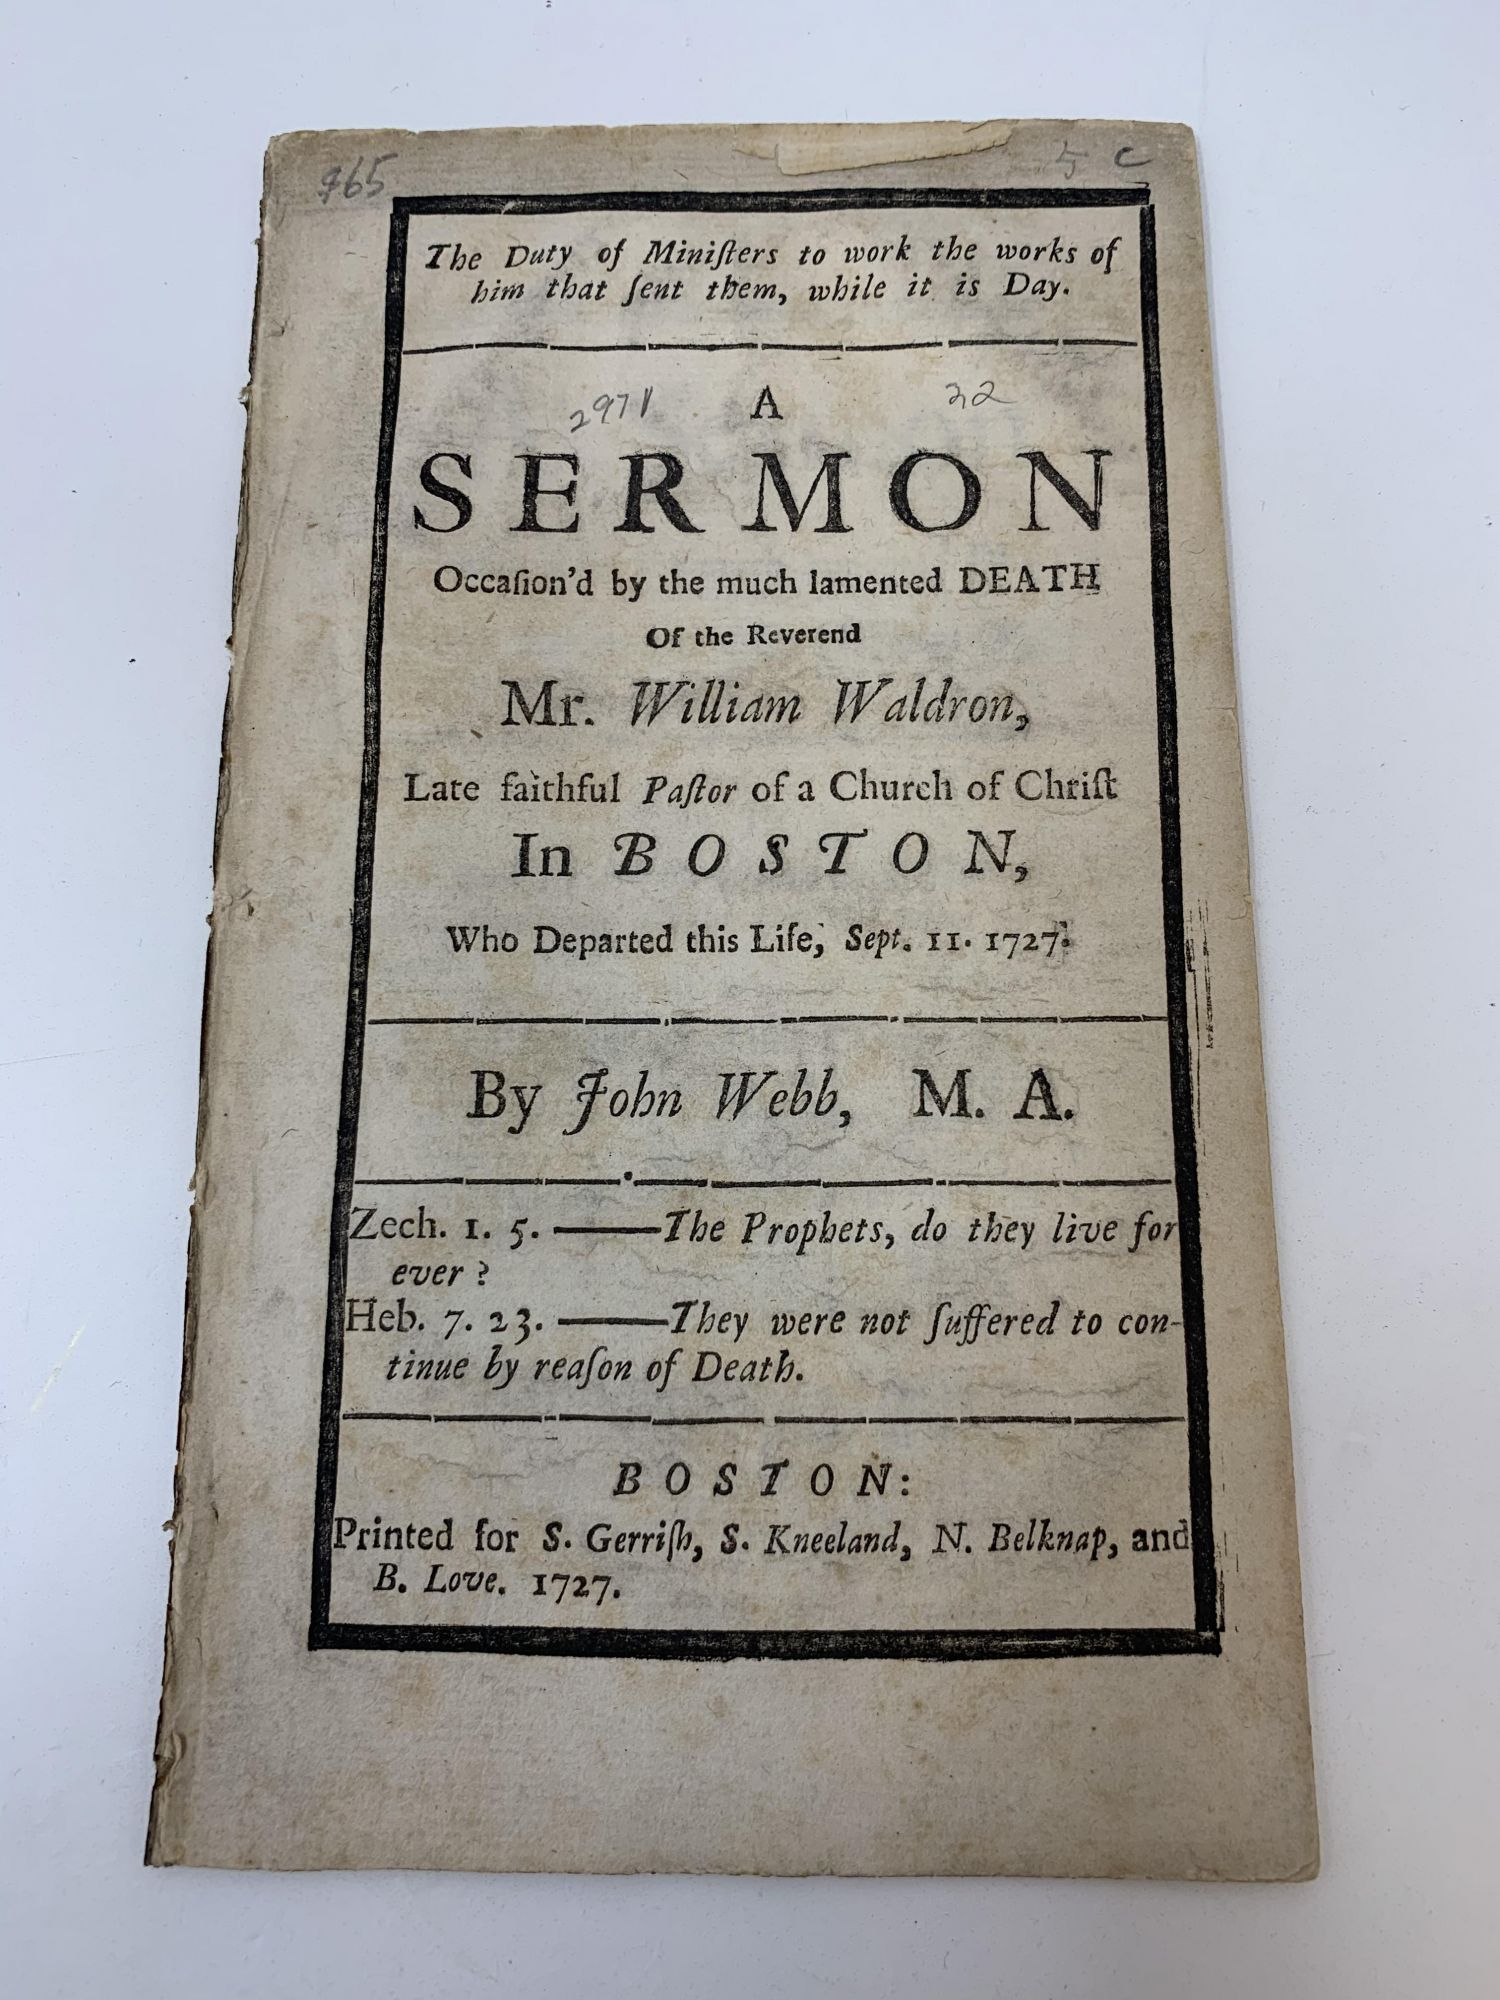 Webb, John - The Duty of Ministers to Work the Works of Him That Sent Them, While It Is Day. A Sermon Occasion'd by the Much Lamented Death of the Reverend Mr. William Waldron, Late Faithful Pastor of a Church of Christ in Boston, Who Departed This Life, Sept. 11. 1727. By John Webb, M.A.